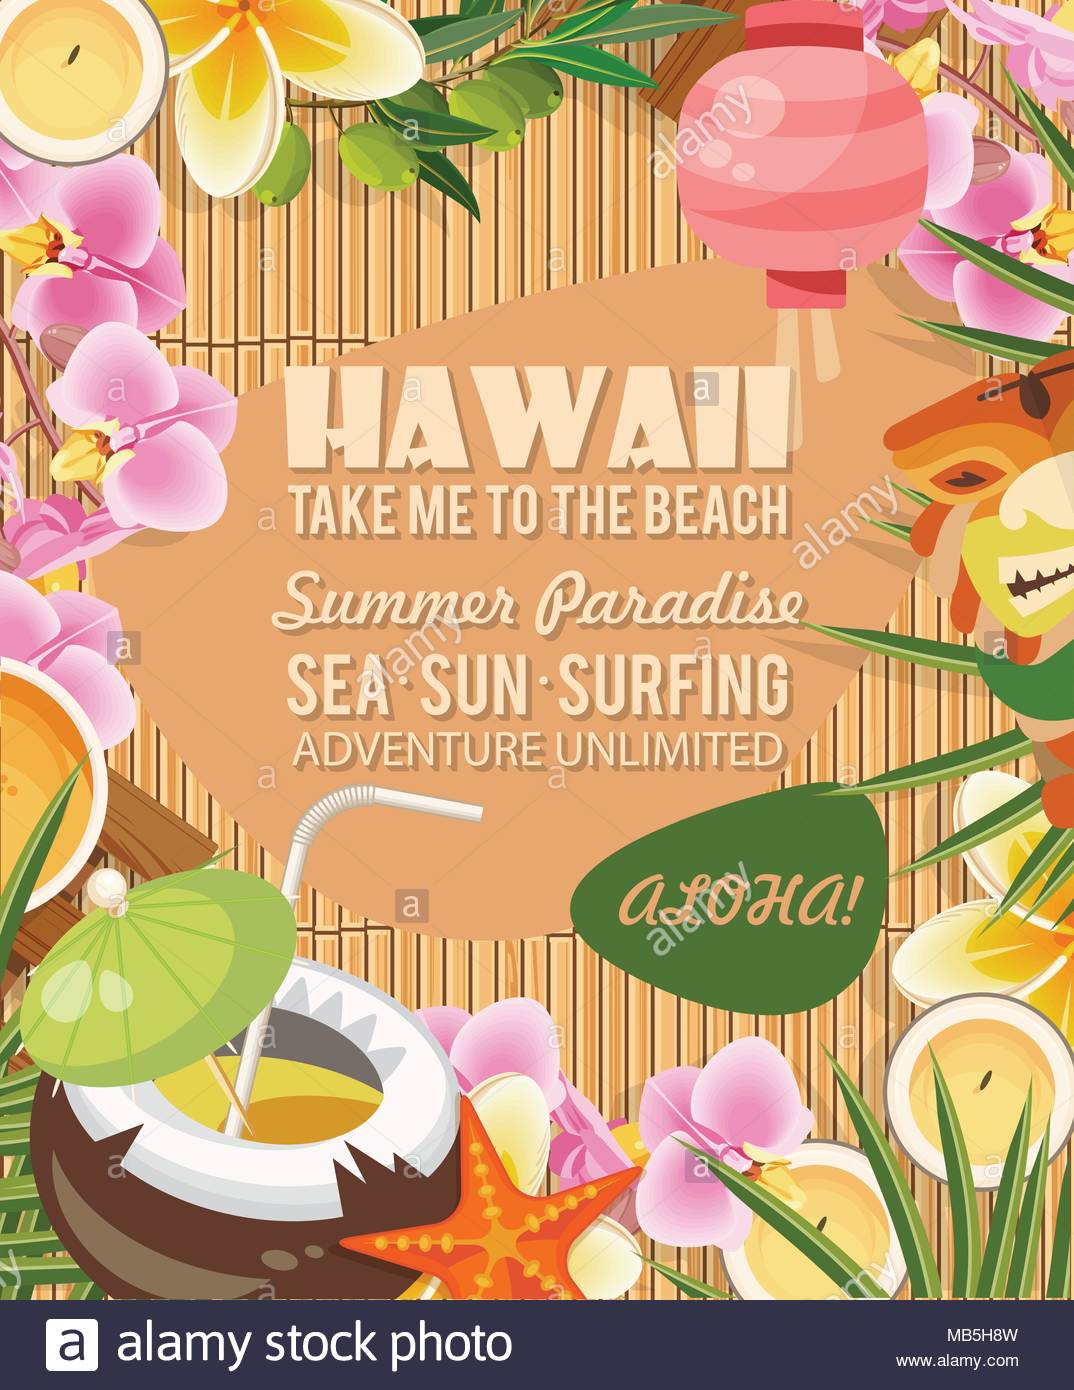 Hawaii Vector Travel Illustration With Colorful Background Summer